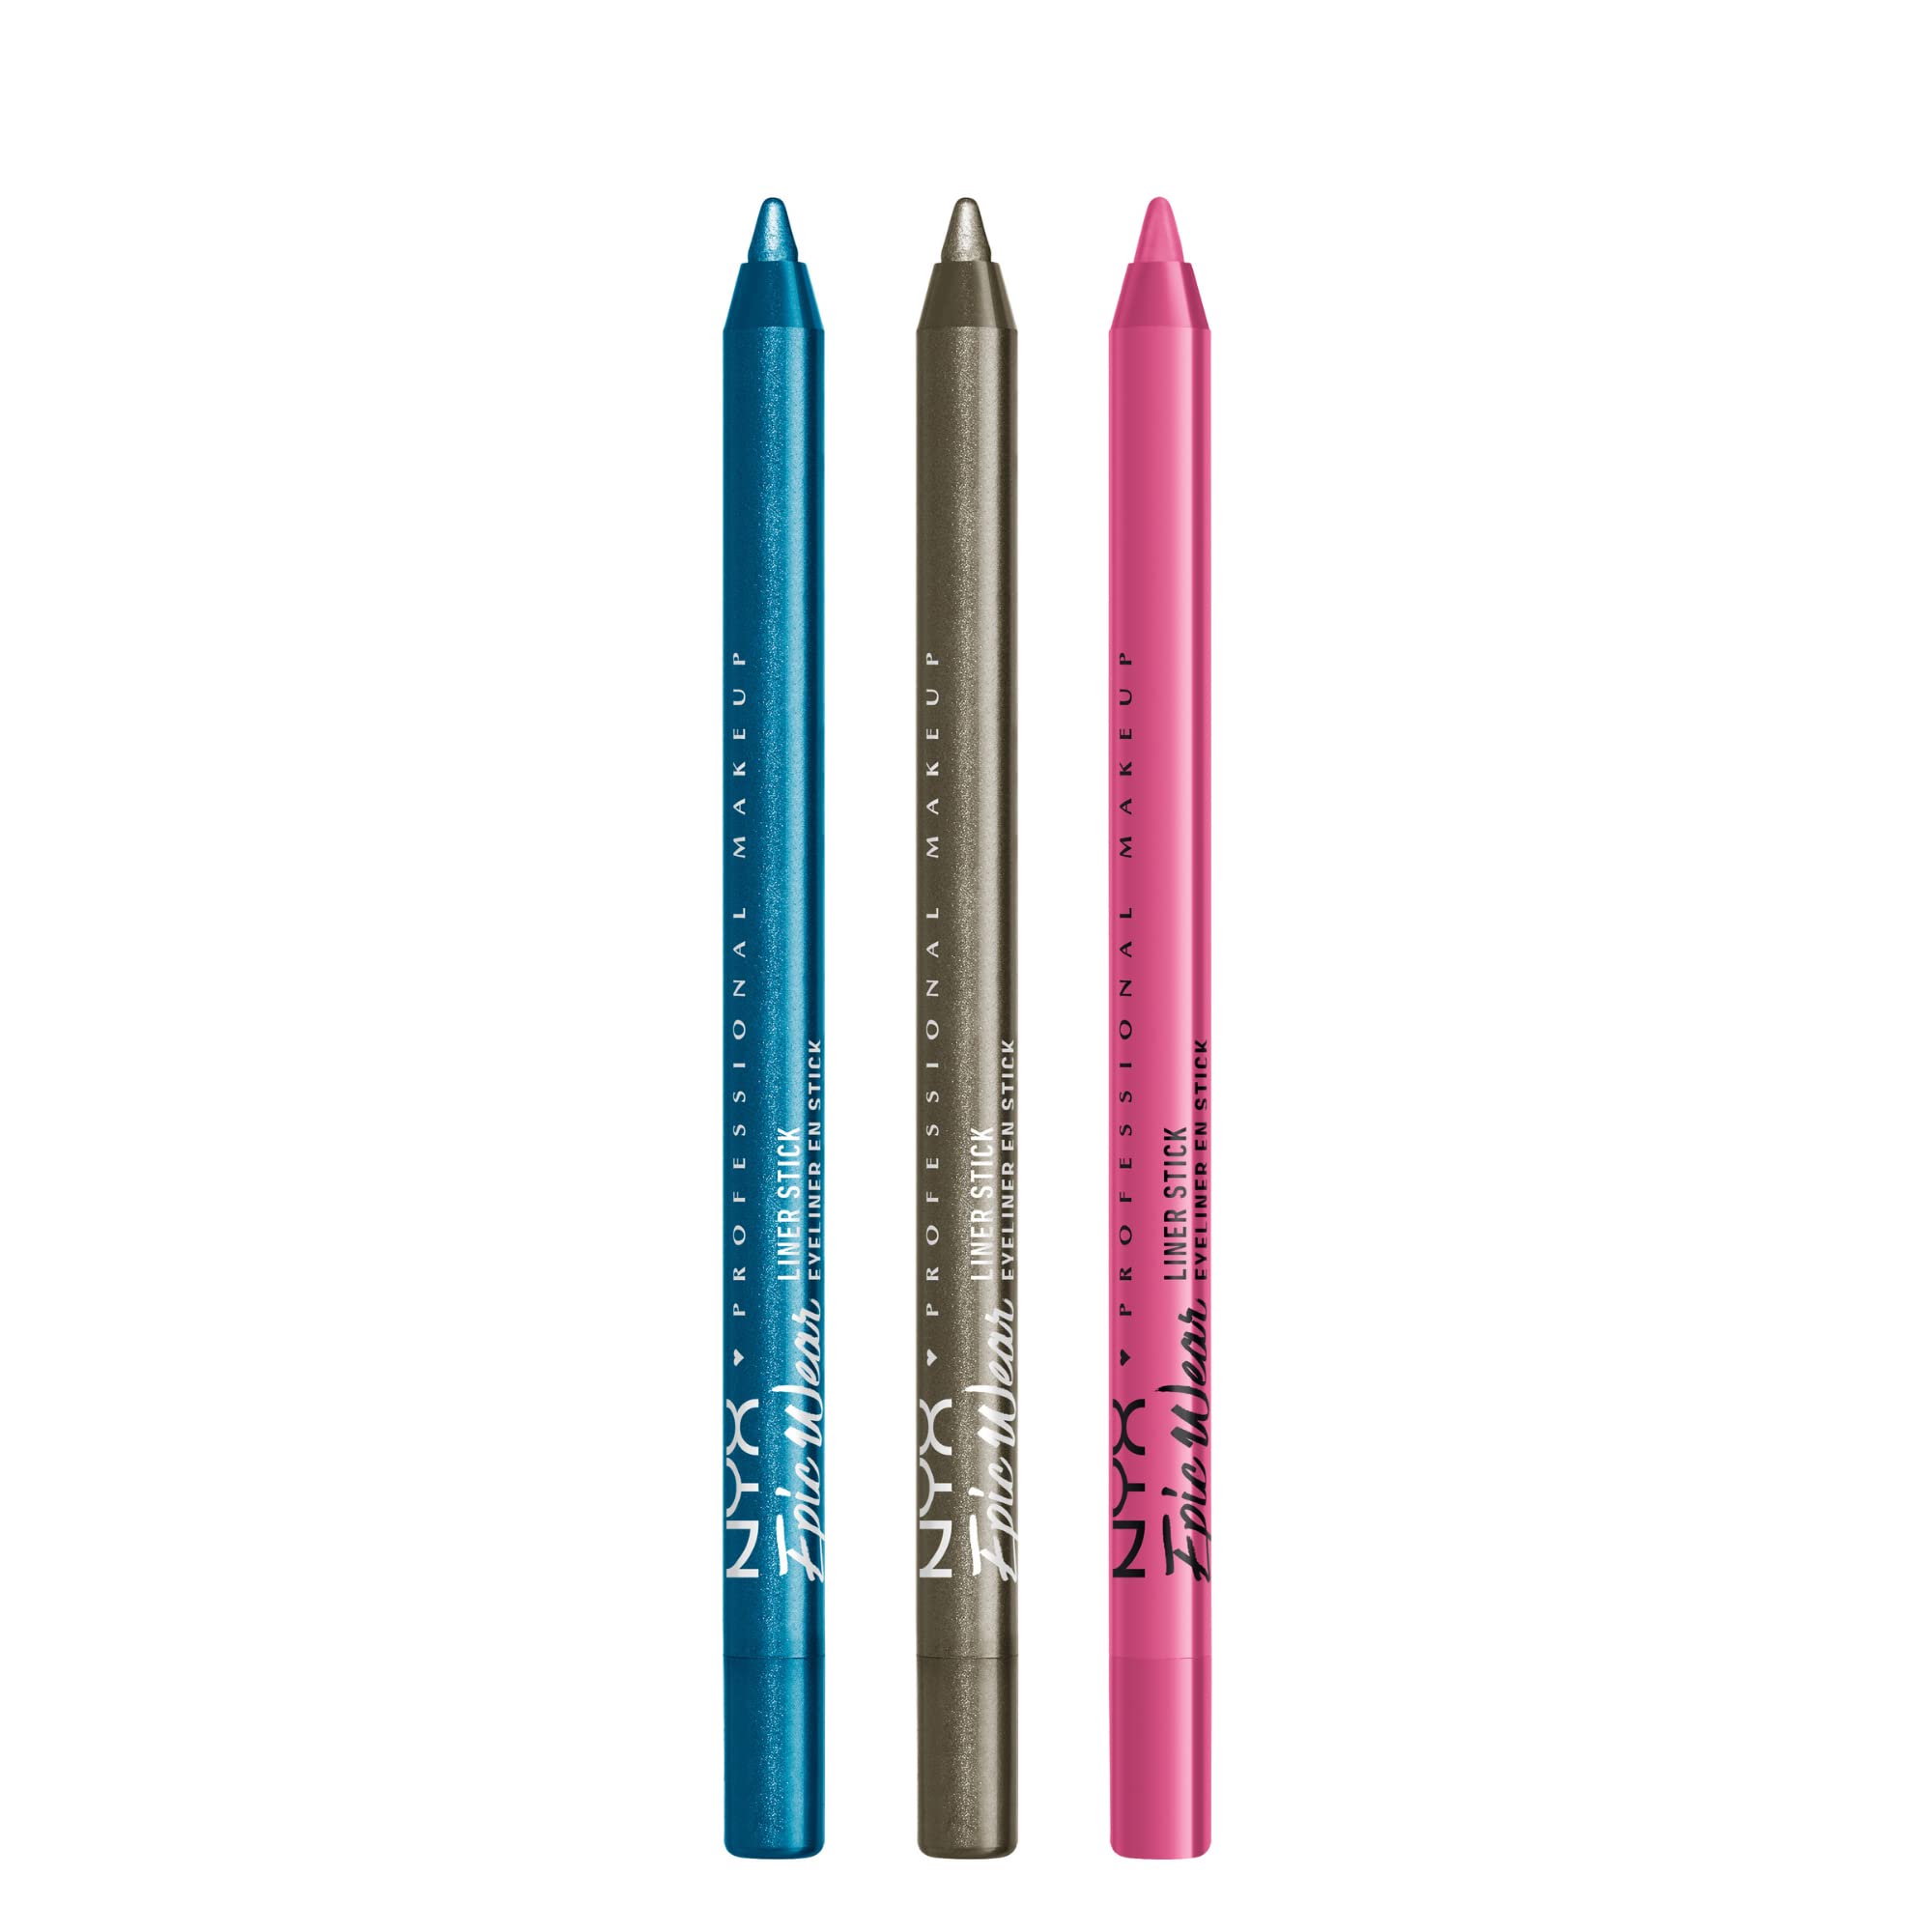 NYX PROFESSIONAL MAKEUP Epic Wear Liner Stick Long-Lasting Eyeliner Pencil  - Pack of 3 (Turquoise Storm